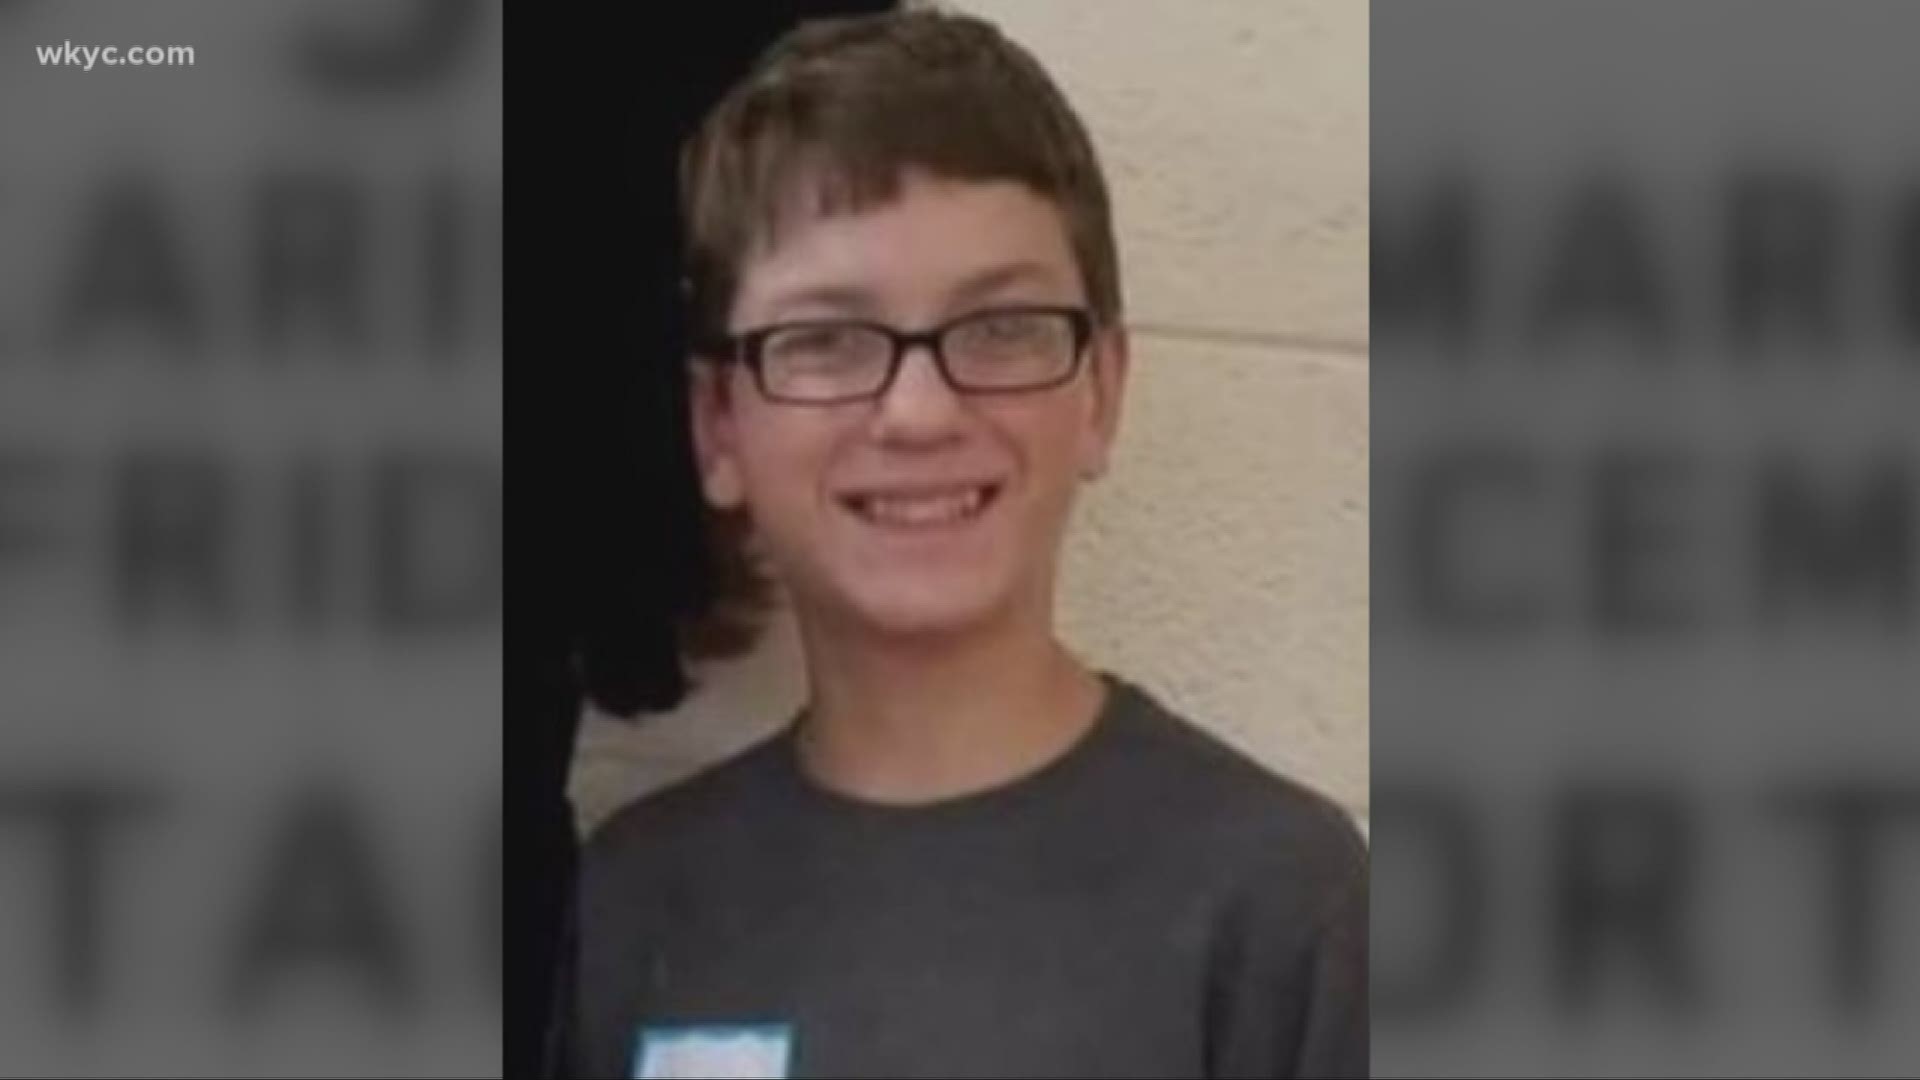 Harley, 14, was found dead in a vacant home across the street from his own house last week. Investigators believe he died the day he fell into a chimney & got stuck